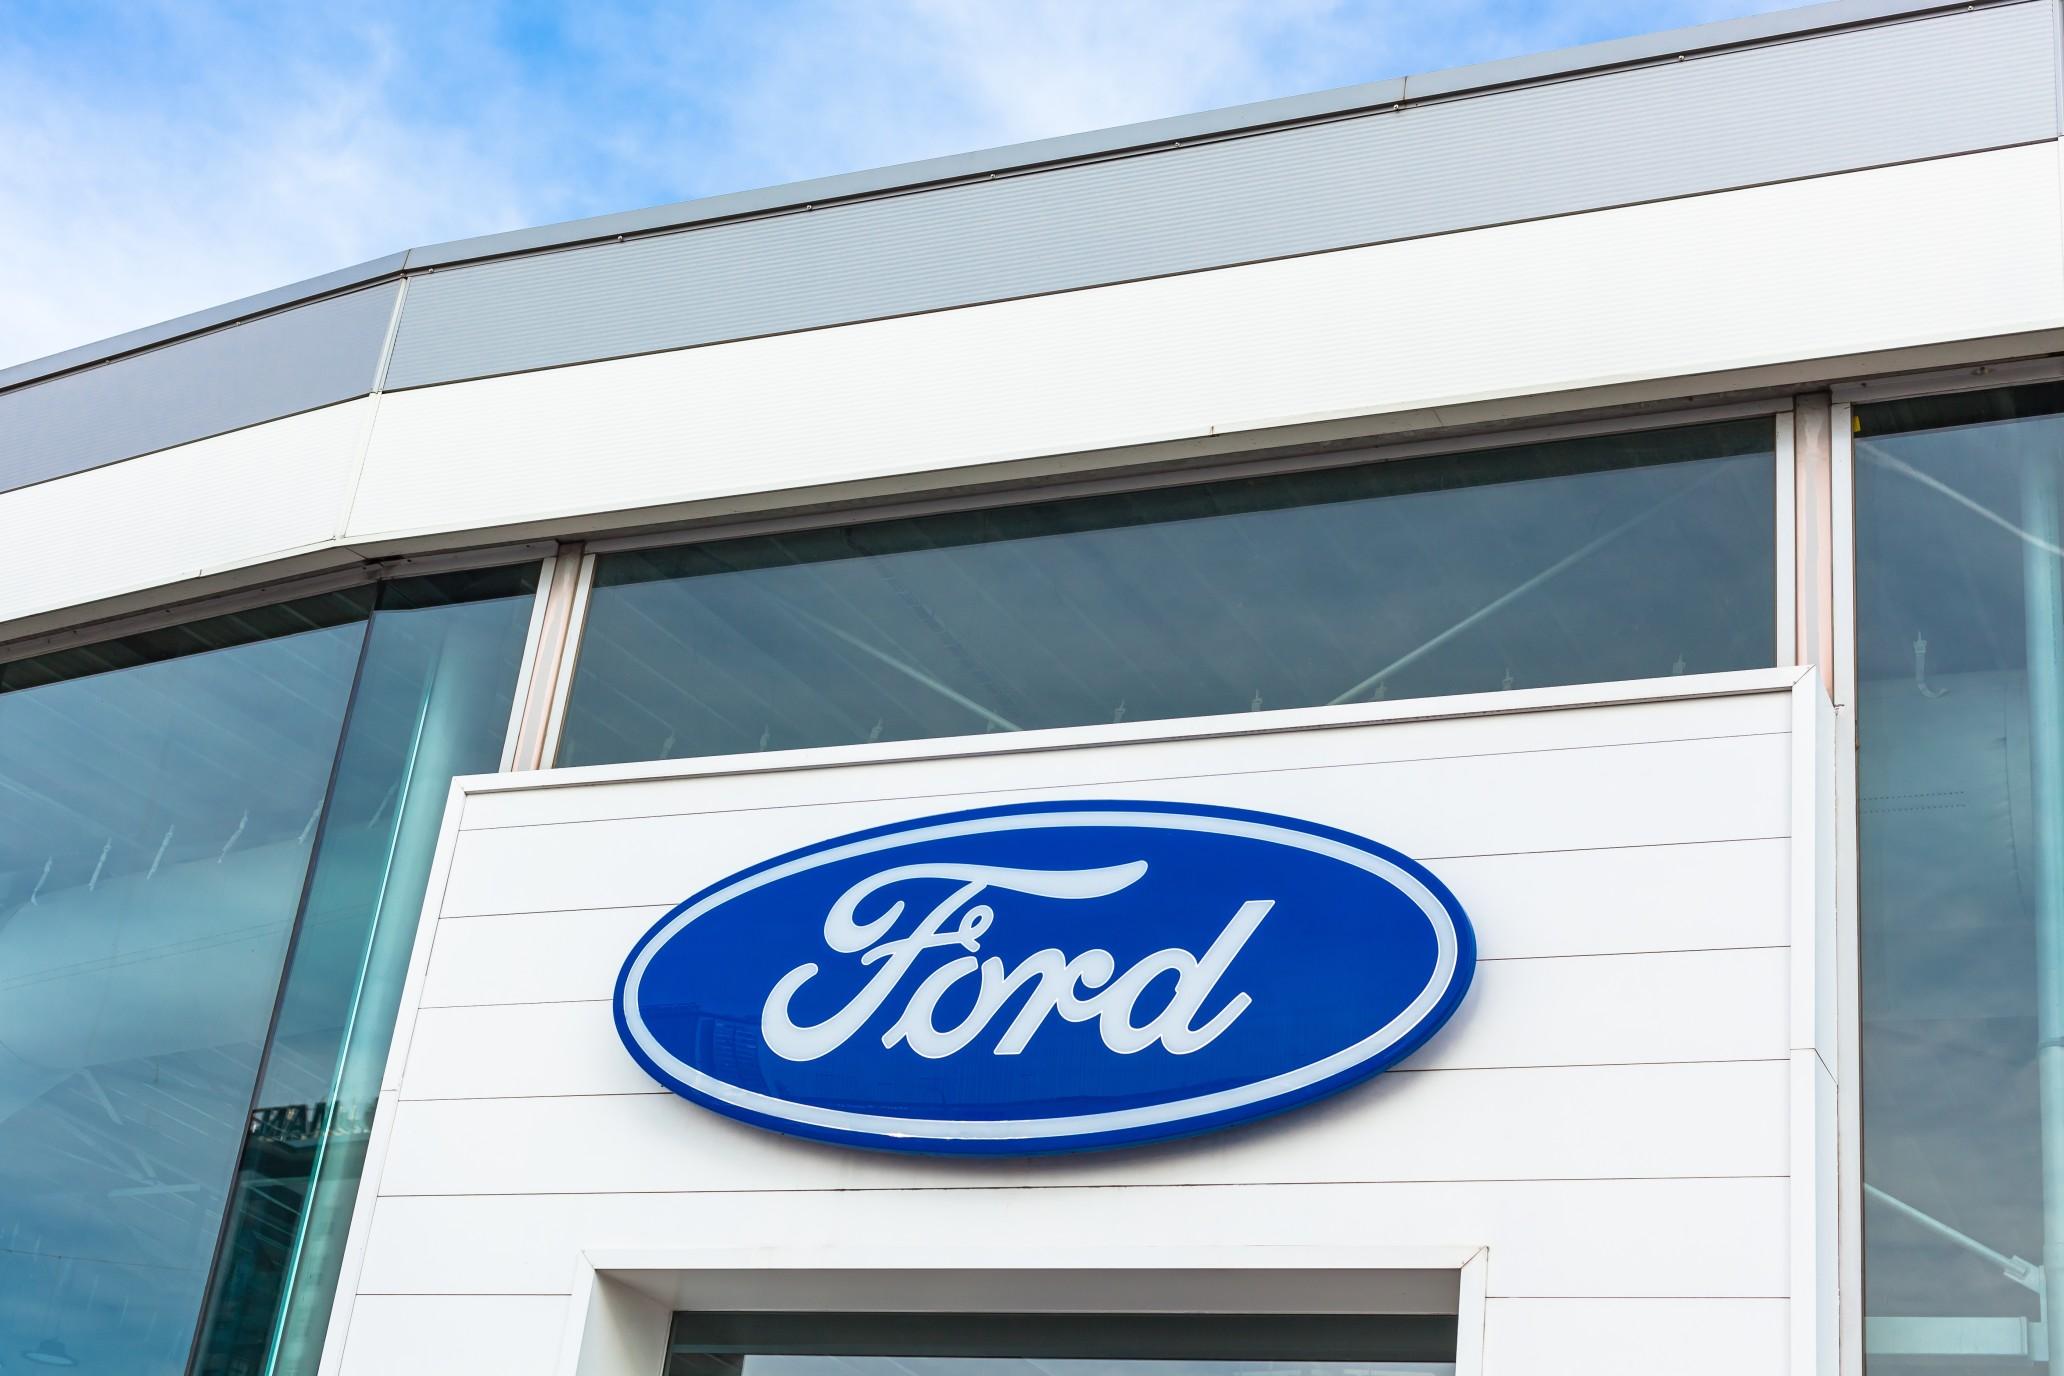 Nearly every Ford vehicle suffered a sales decrease this August.